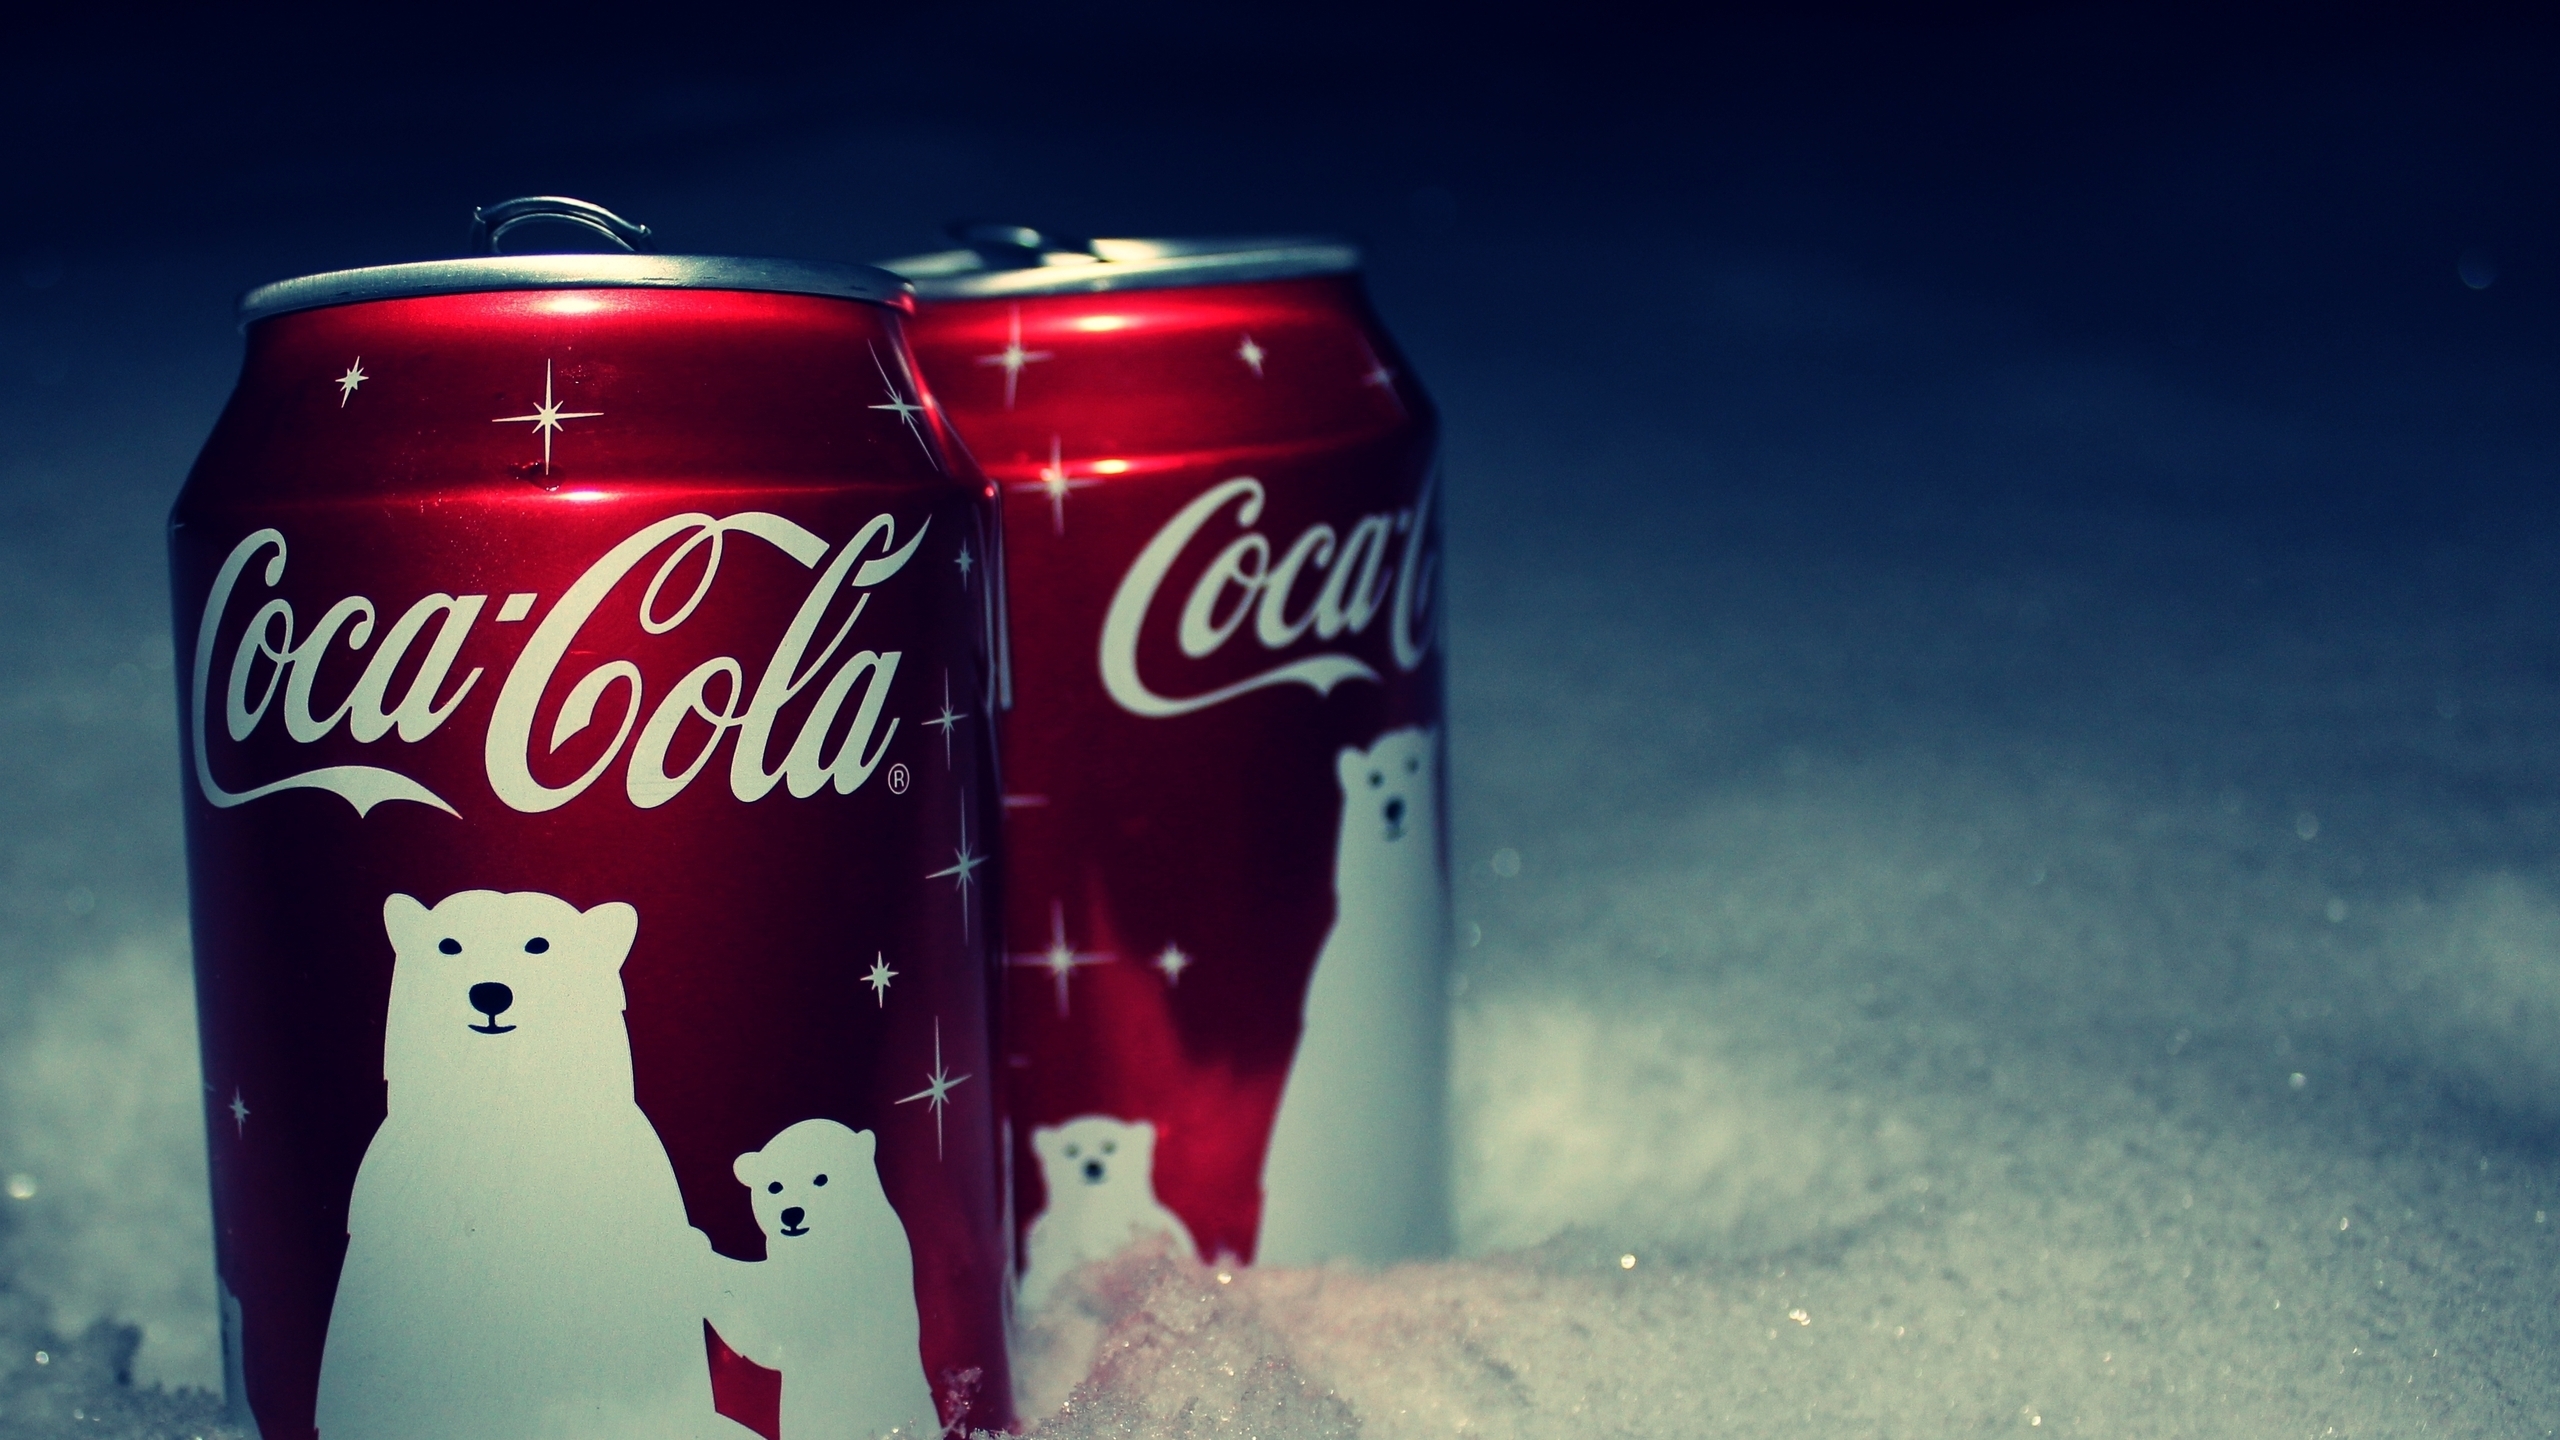 CocaCola for Christmas for 2560x1440 HDTV resolution